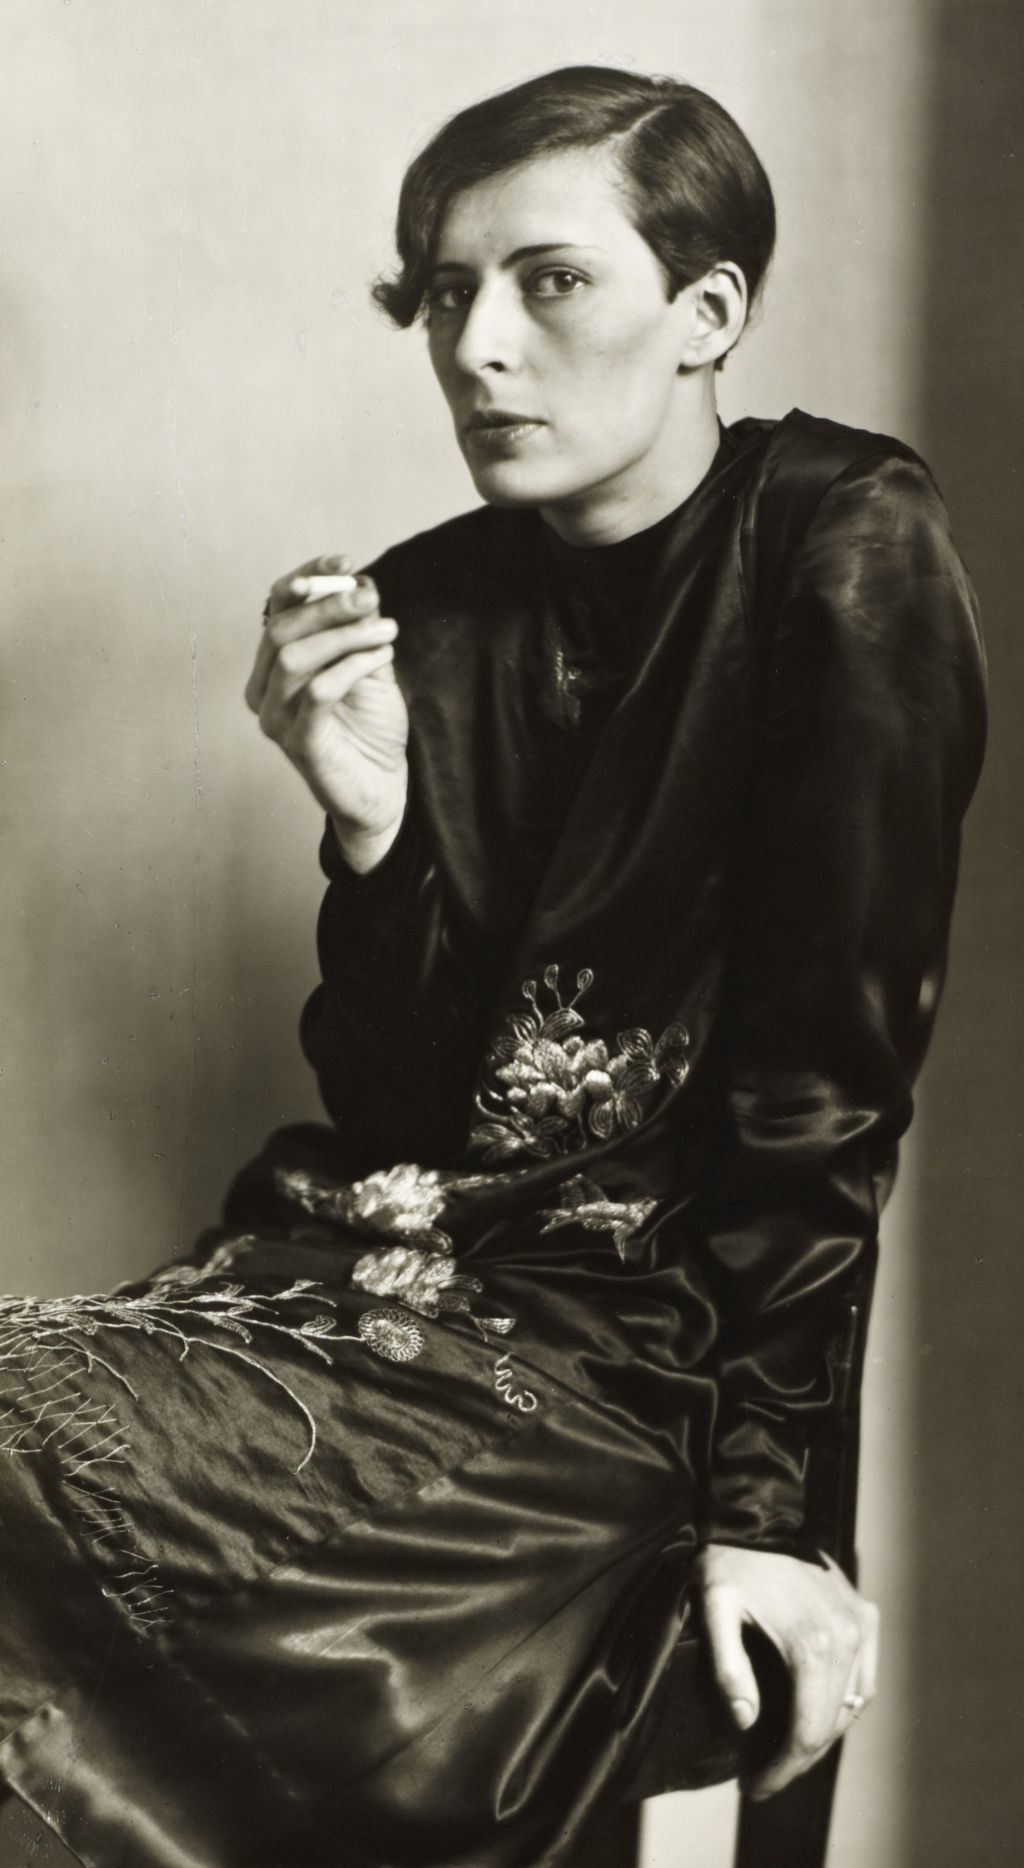 A black and white photo of a woman looking at the camera and smoking a cigarette